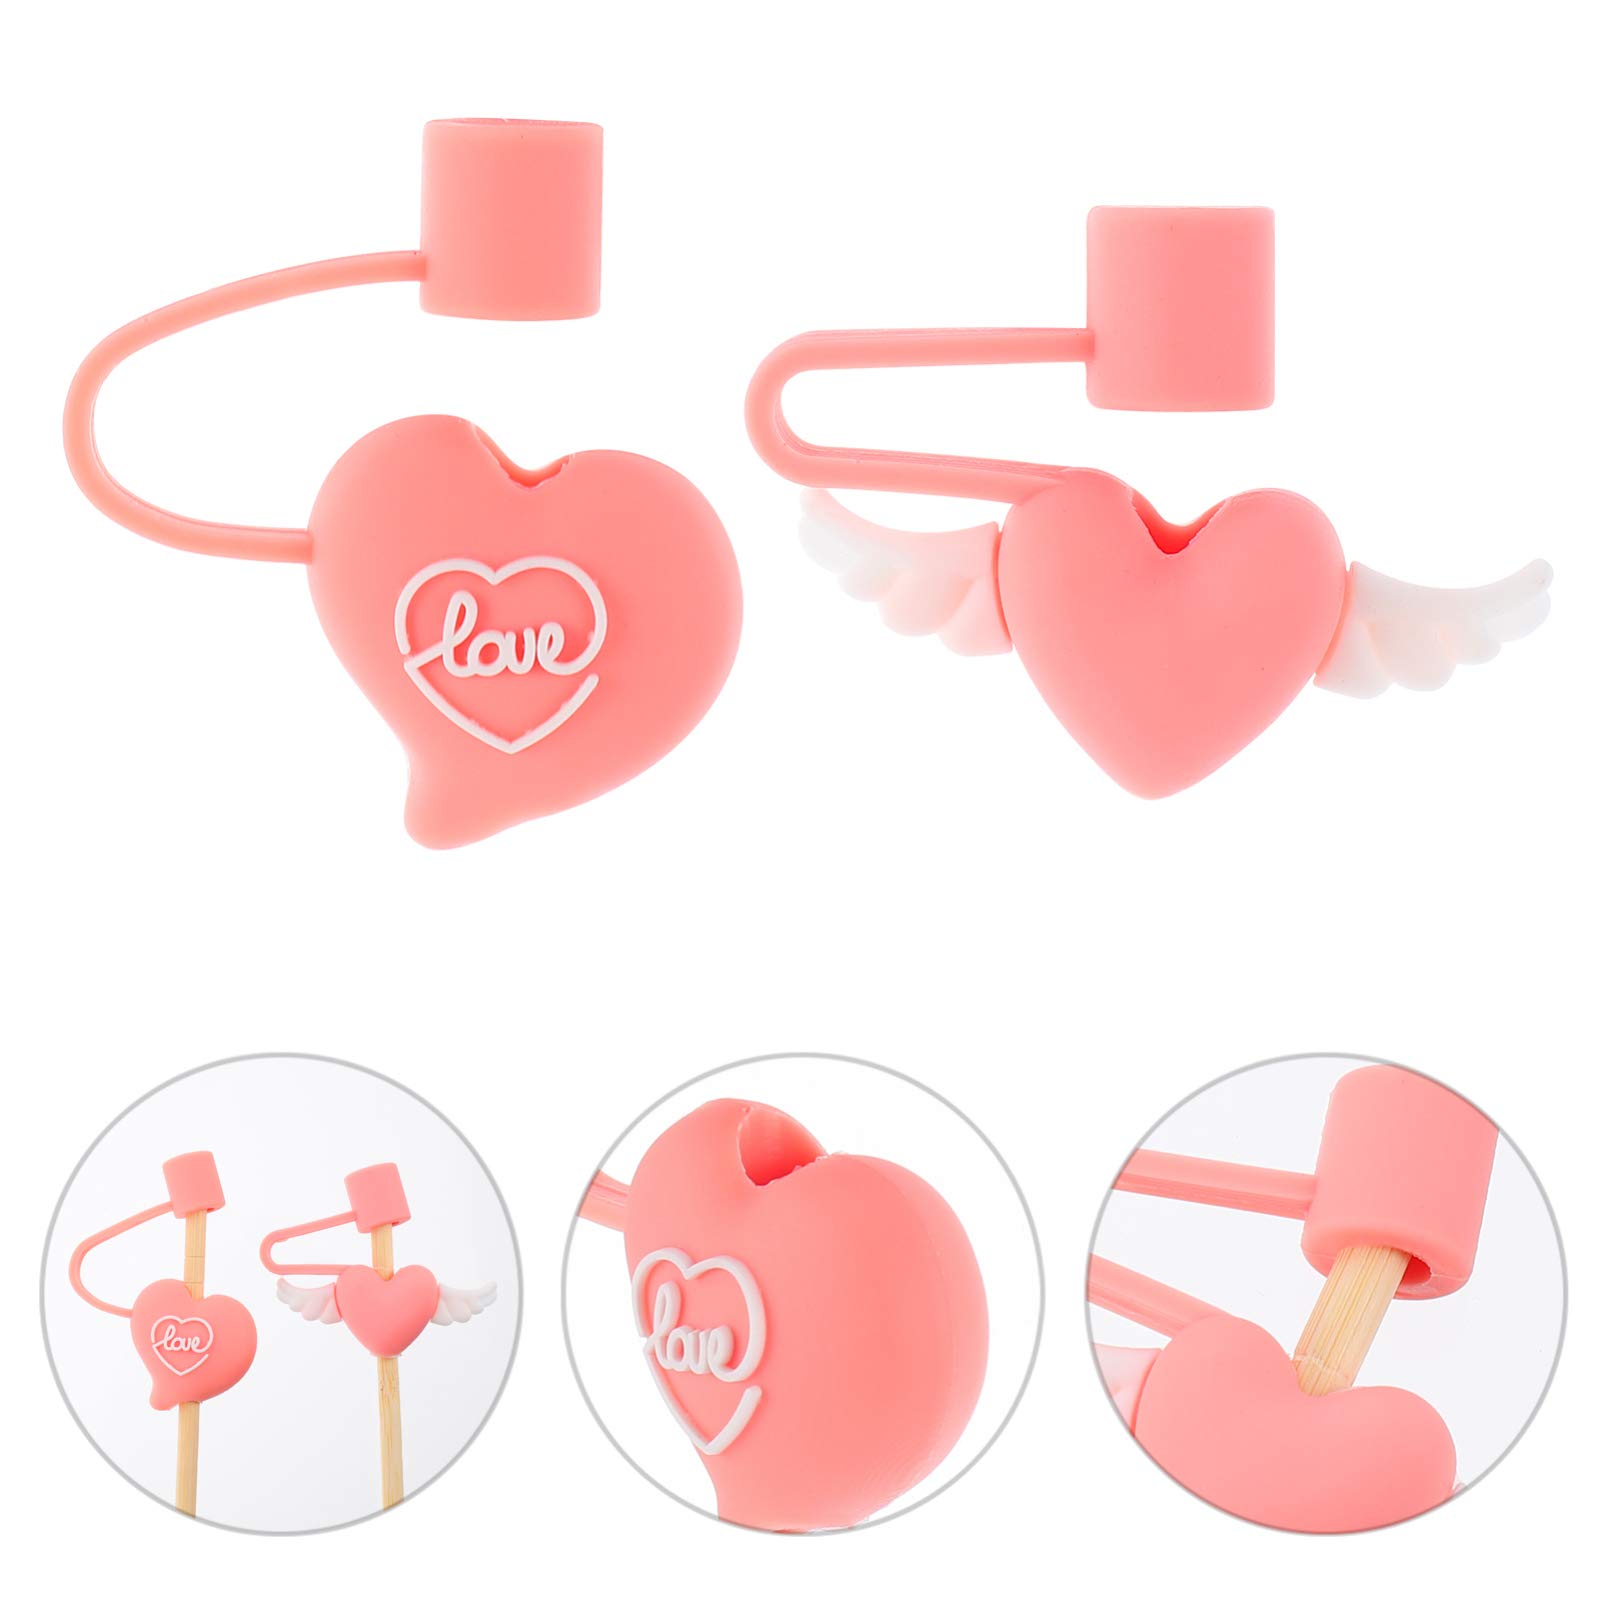 ABOOFAN 4pcs Straw Tips Cover Silicone Reusable Dust-Proof Heart Wing Drinking Straw Tips Lids Plugs Decorative Straw Cap Party Supplies(Pink White)